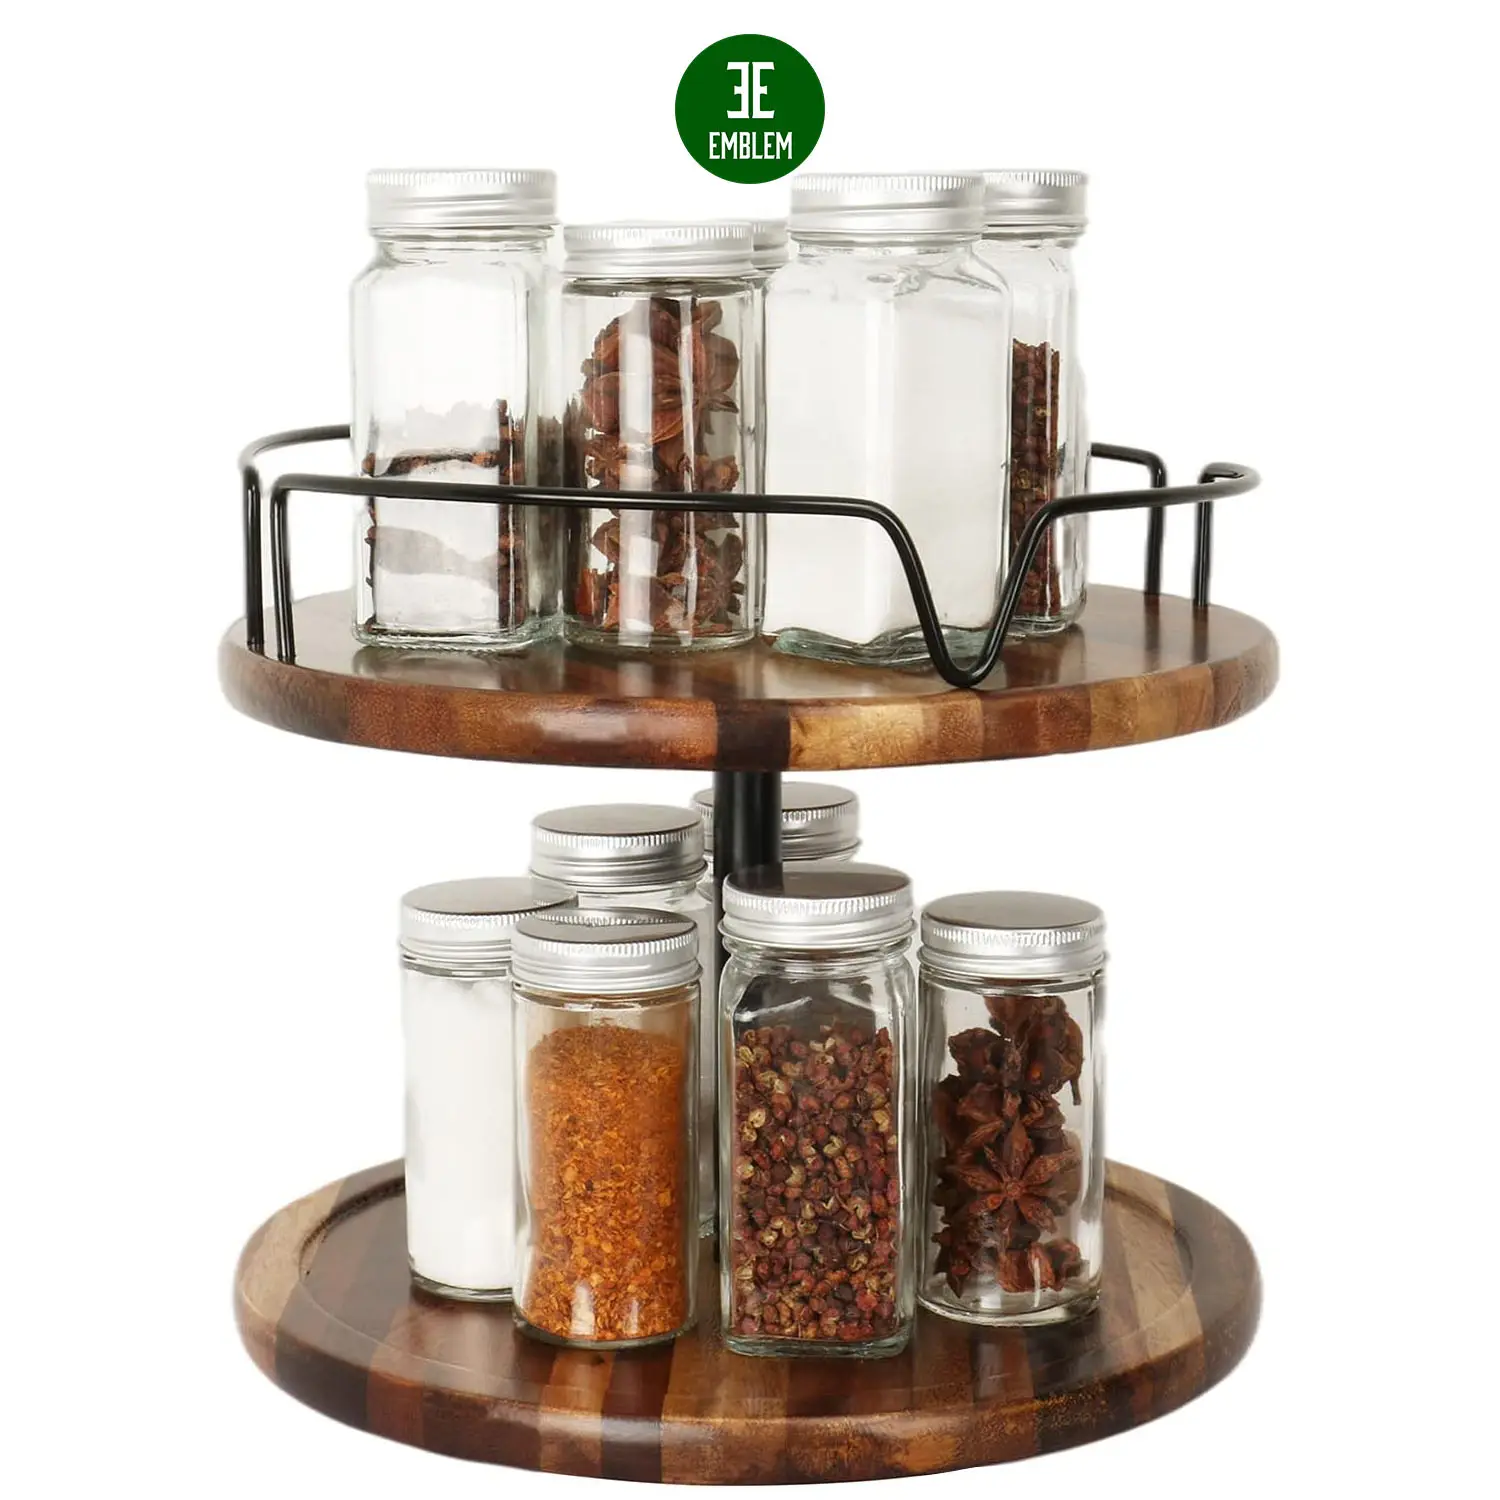 Lazy Susan Turntable 10inch Spinning Spice Rack Holder Wooden Rotating Spice Rack Spice Rack Rotating Walnut 10" 2 Tier